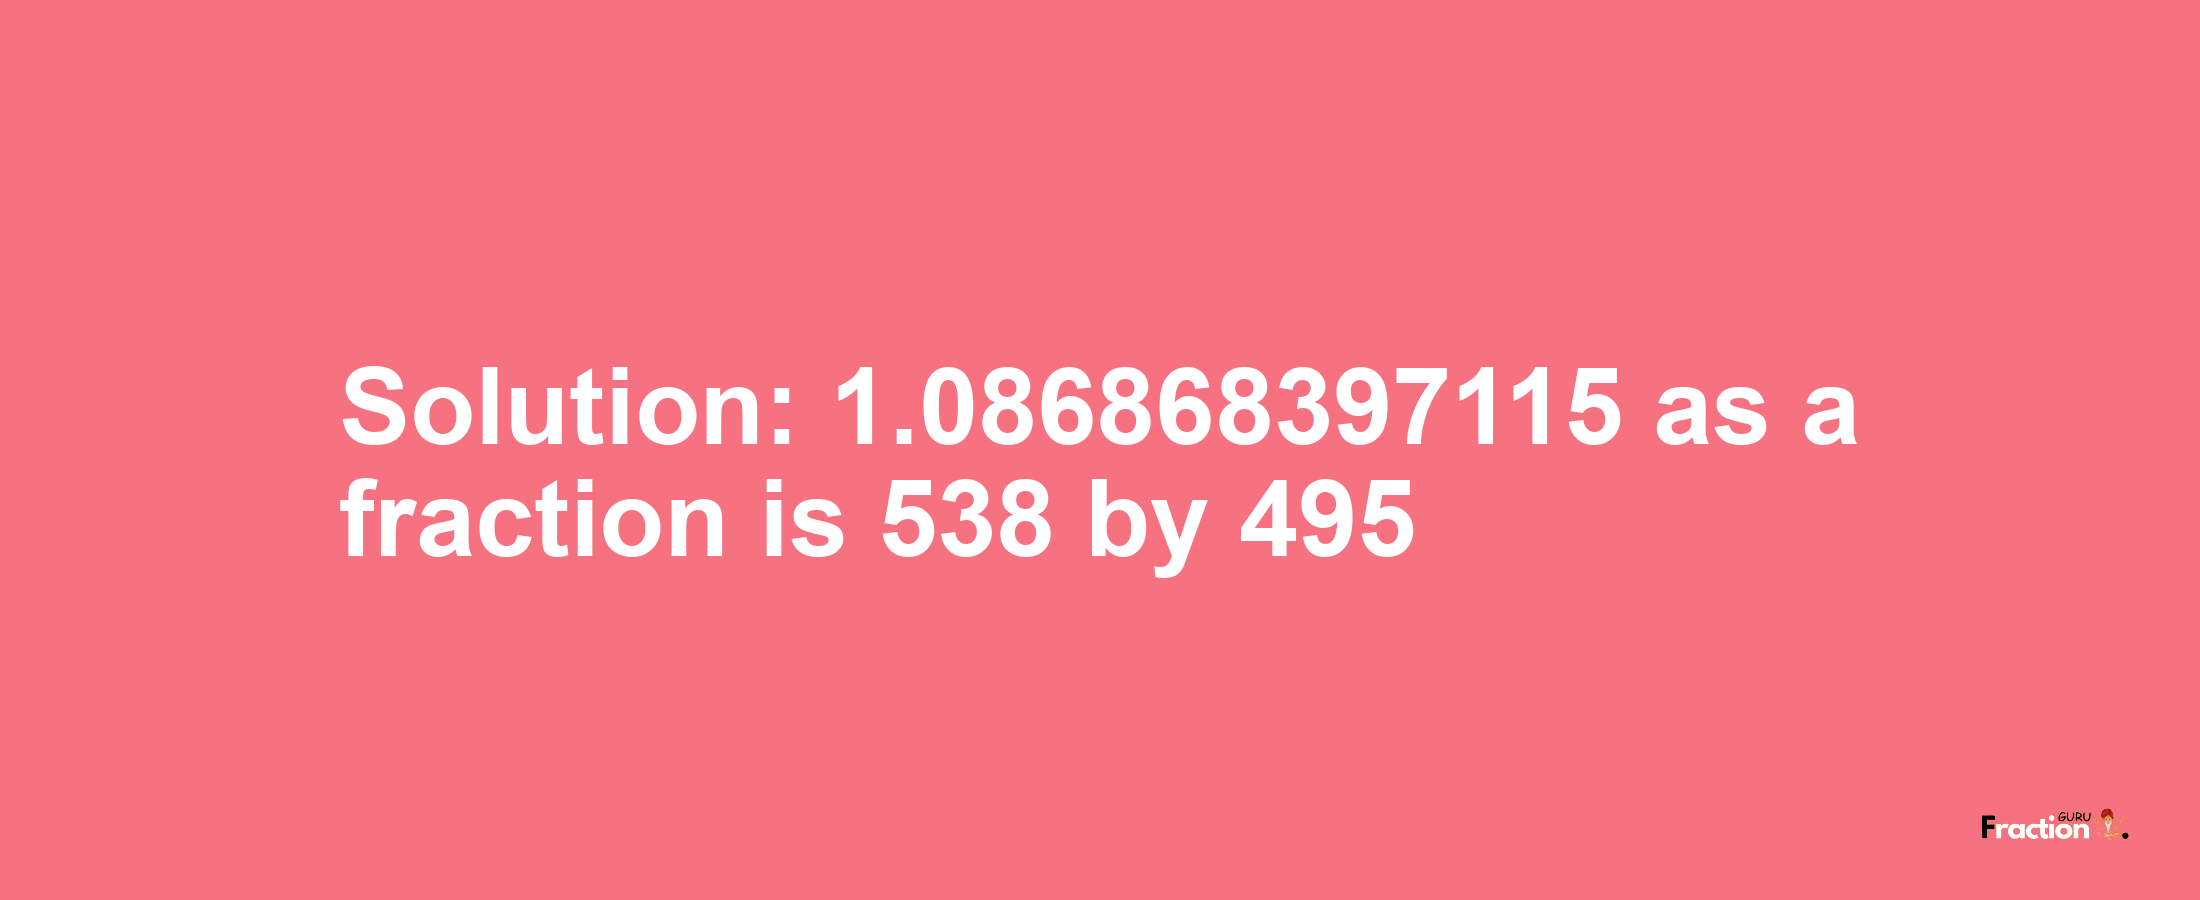 Solution:1.086868397115 as a fraction is 538/495